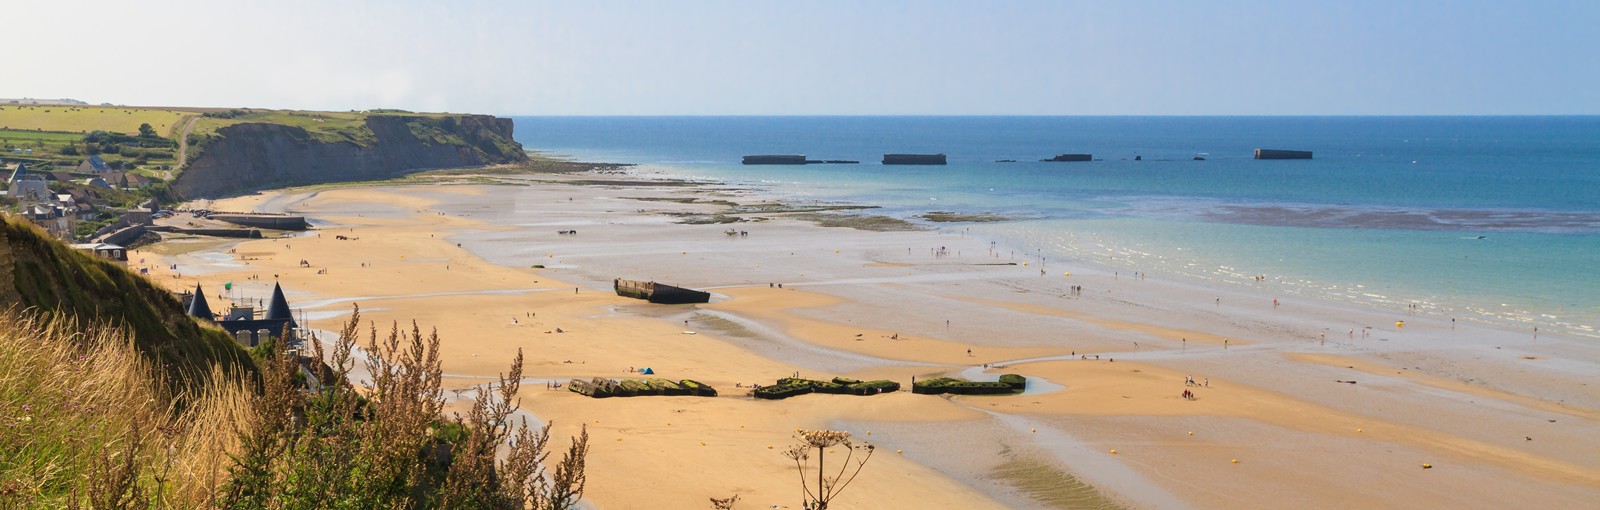 Tours 3 days in Normandy, a thorough exploration of the "DDay" Landings area - Normandy - Multiday tours from Paris